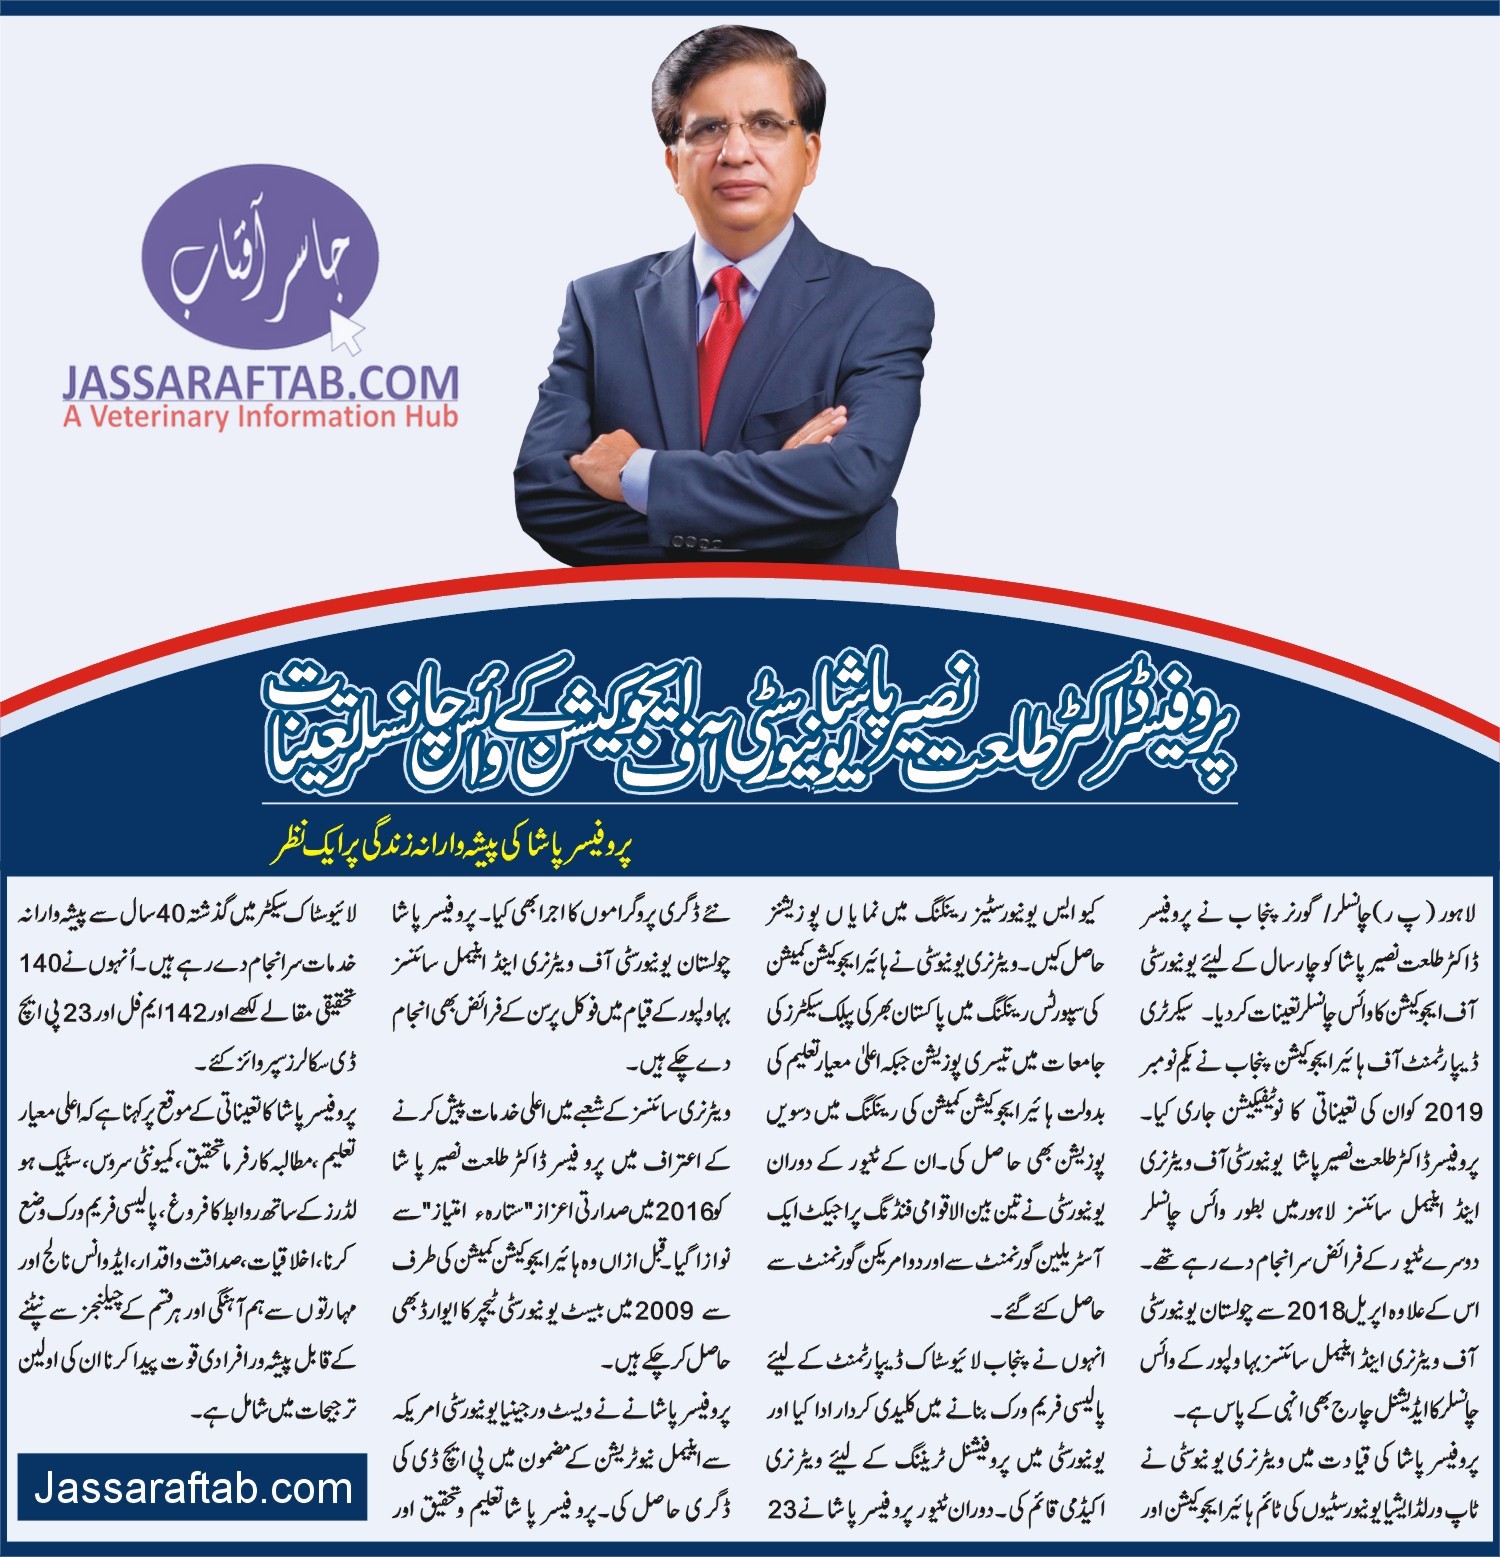 Some Words about the professional life of Prof. Dr. Talat Nasir Pasha 